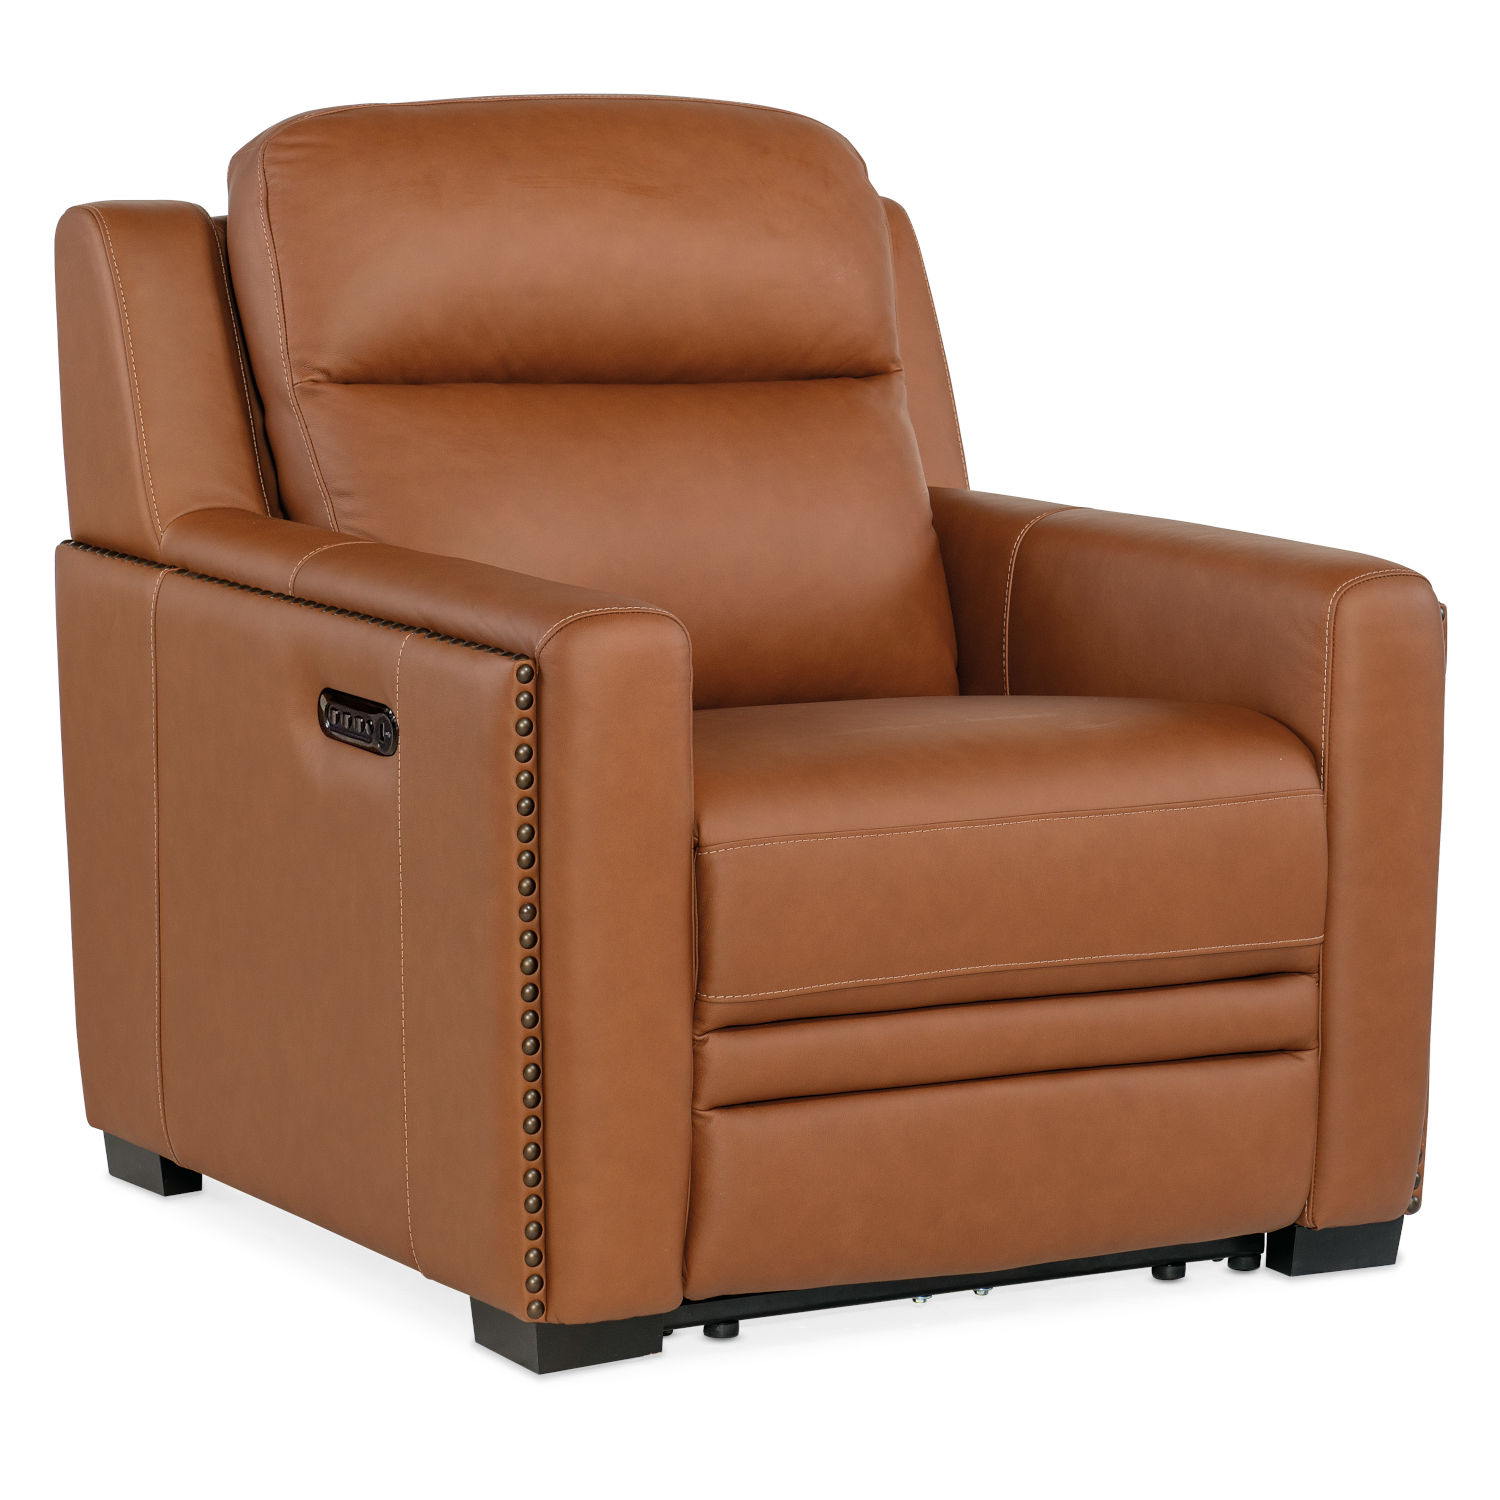 Chairs & Recliners Category